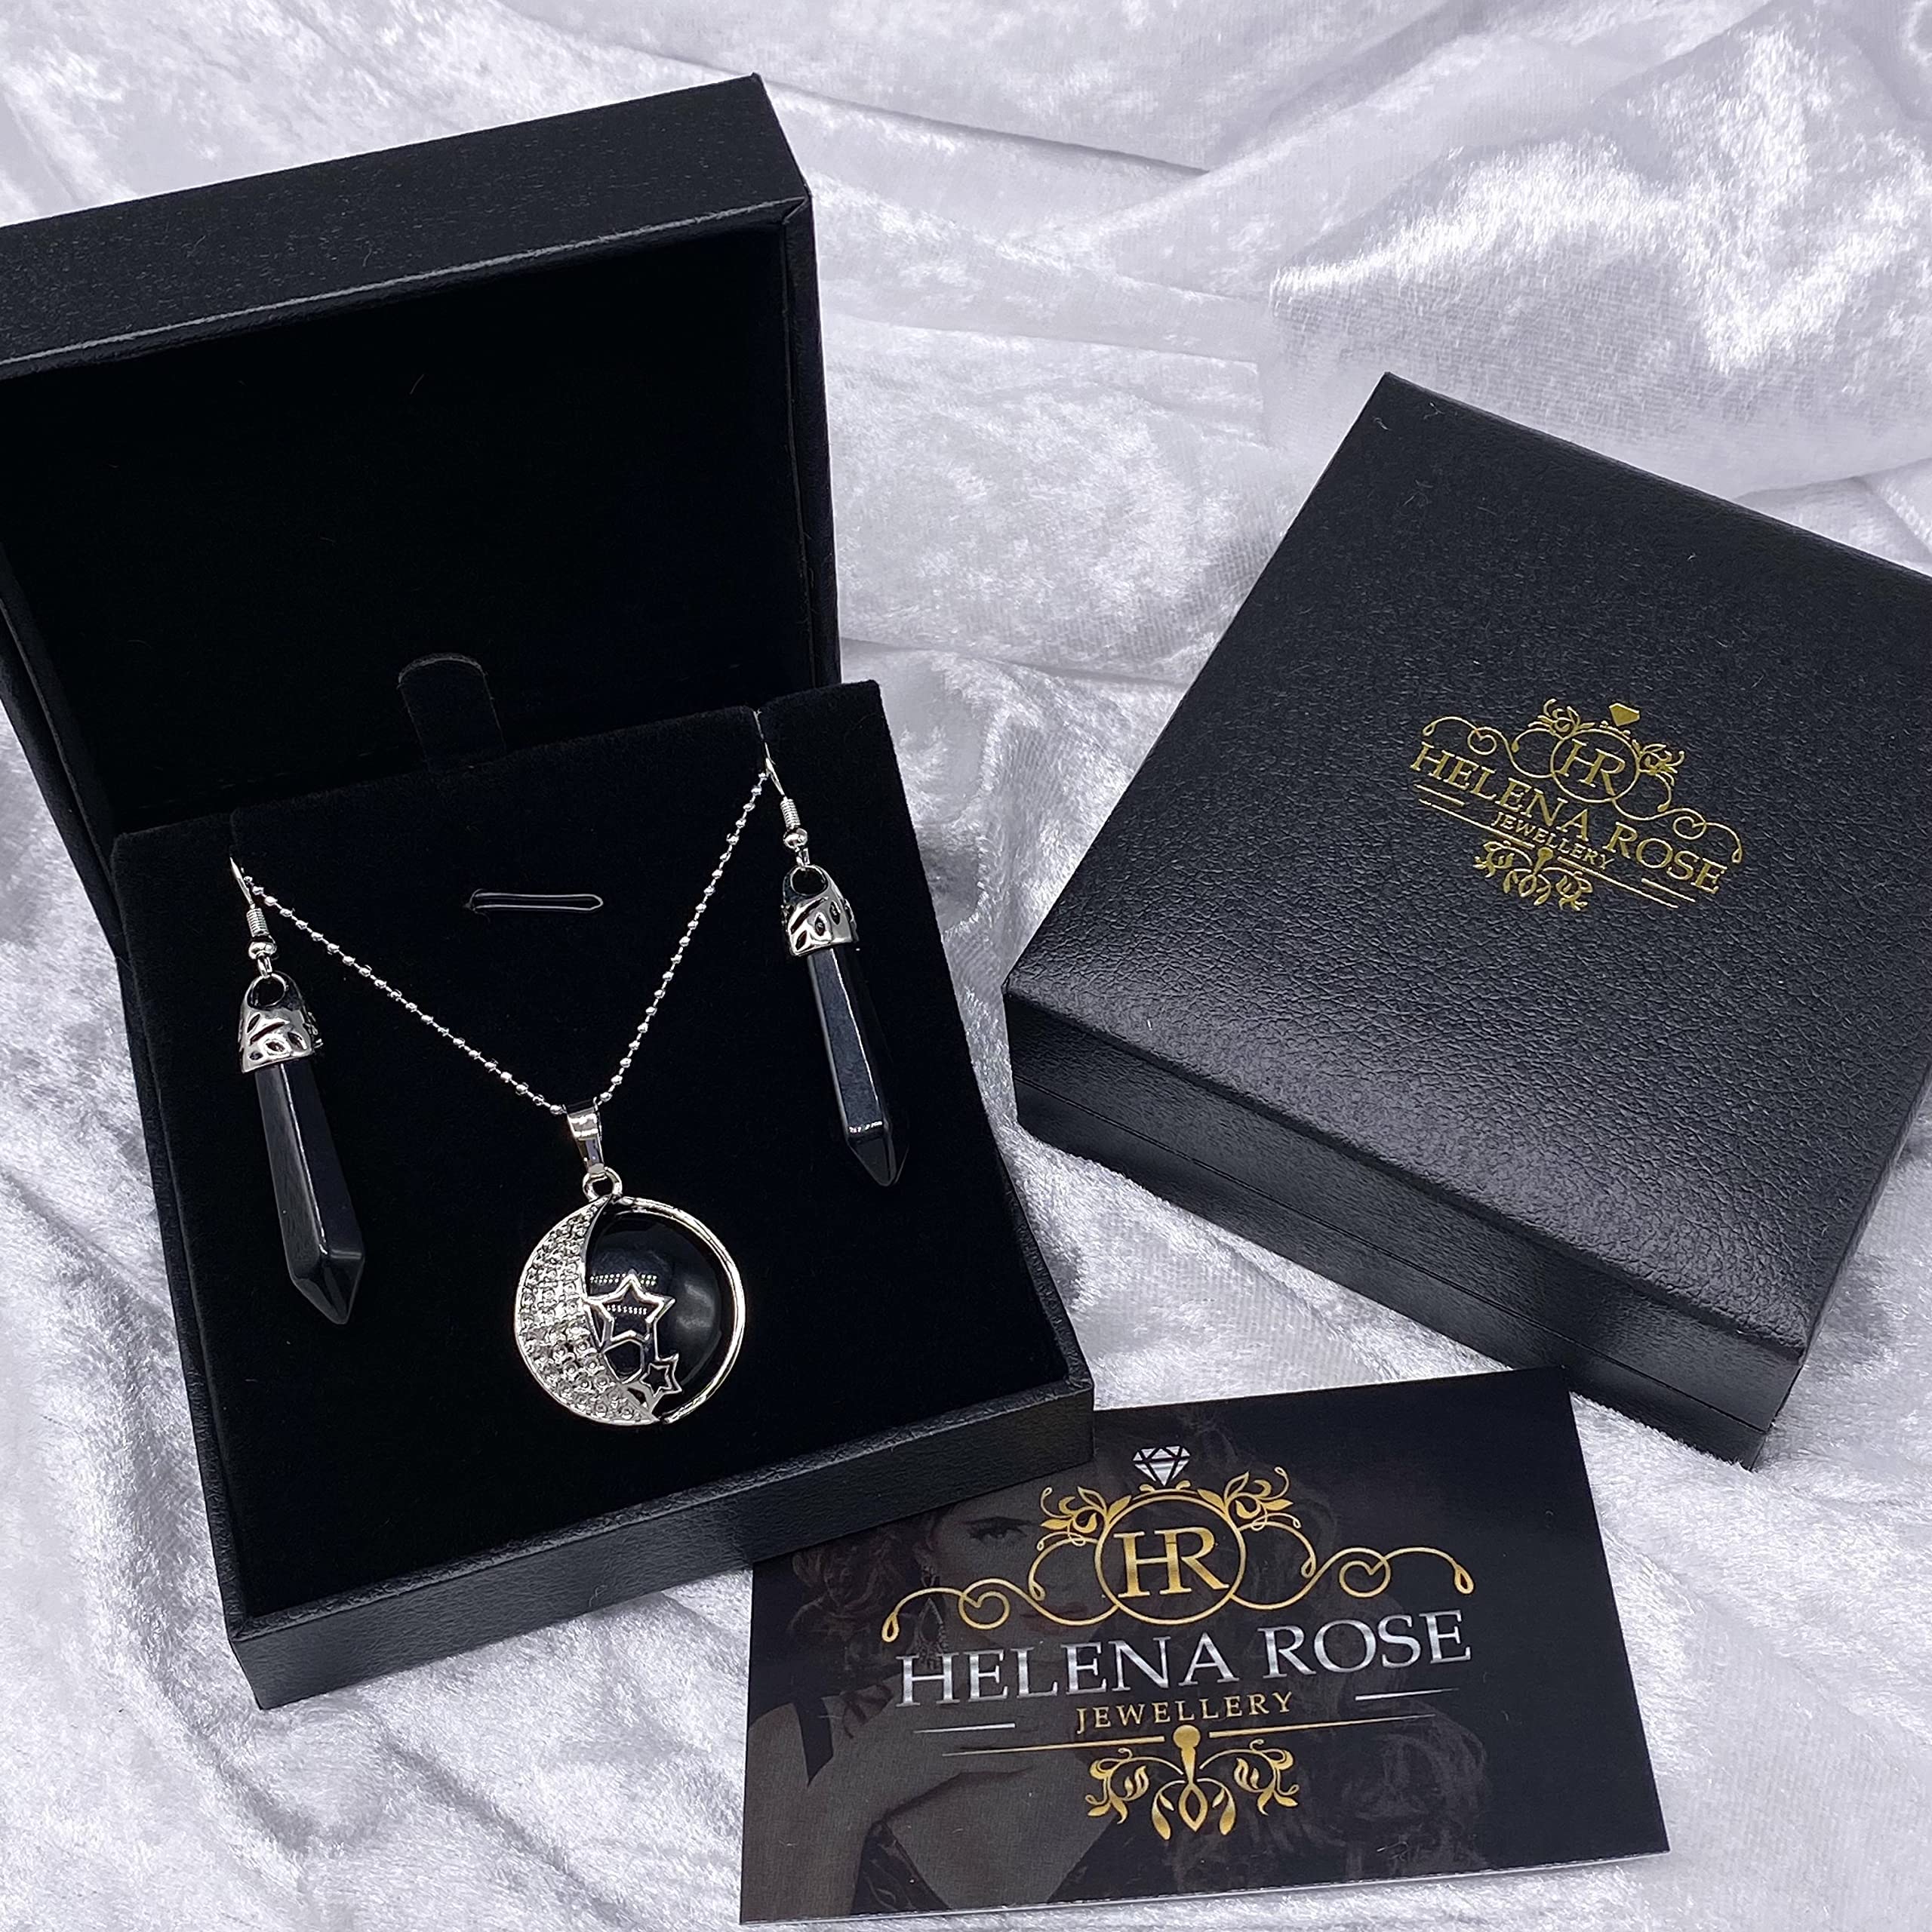 Jewellery Gift Set For Women - Silver Moon &amp; Stars Necklace &amp; Drop Earrings - Real Natural Crystal Quartz Gemstone Pendant For Ladies - With a Quality Gift Box